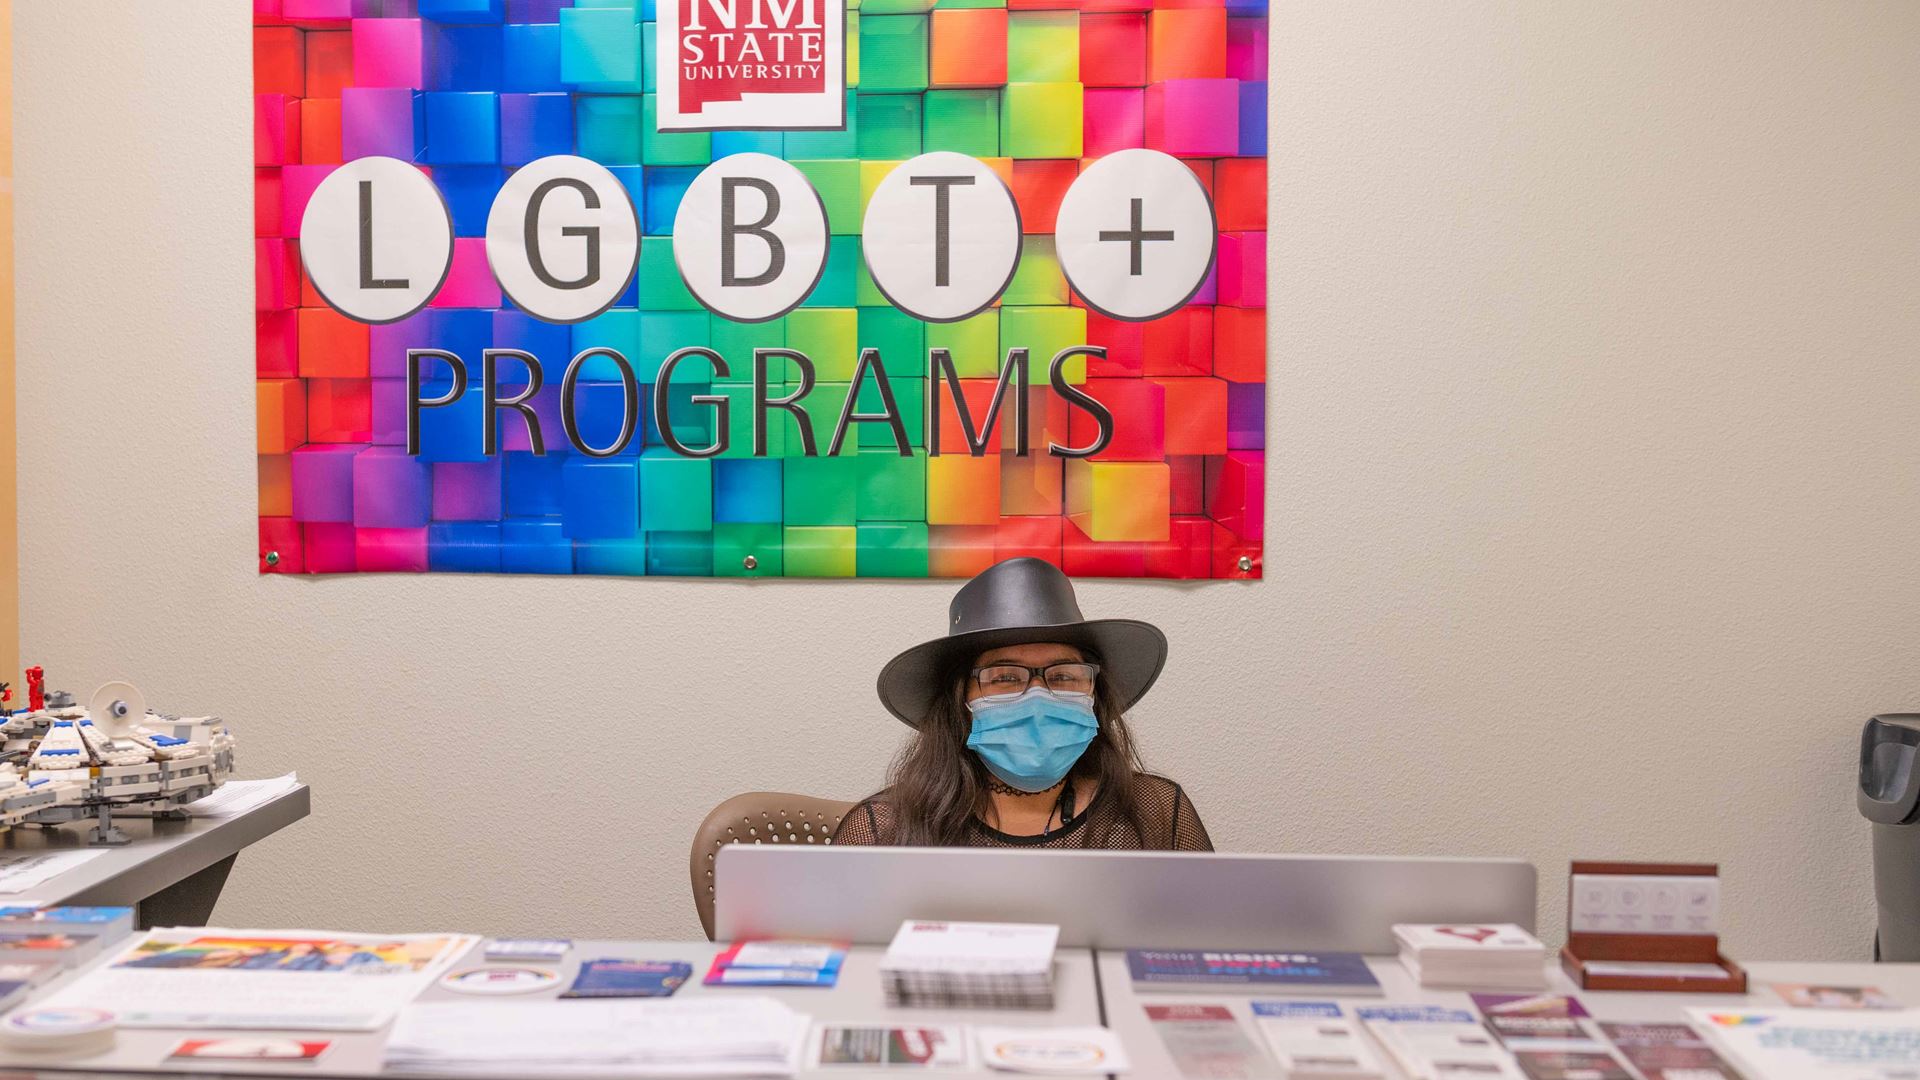 NMSU OUTober events to celebrate LGBT+ community